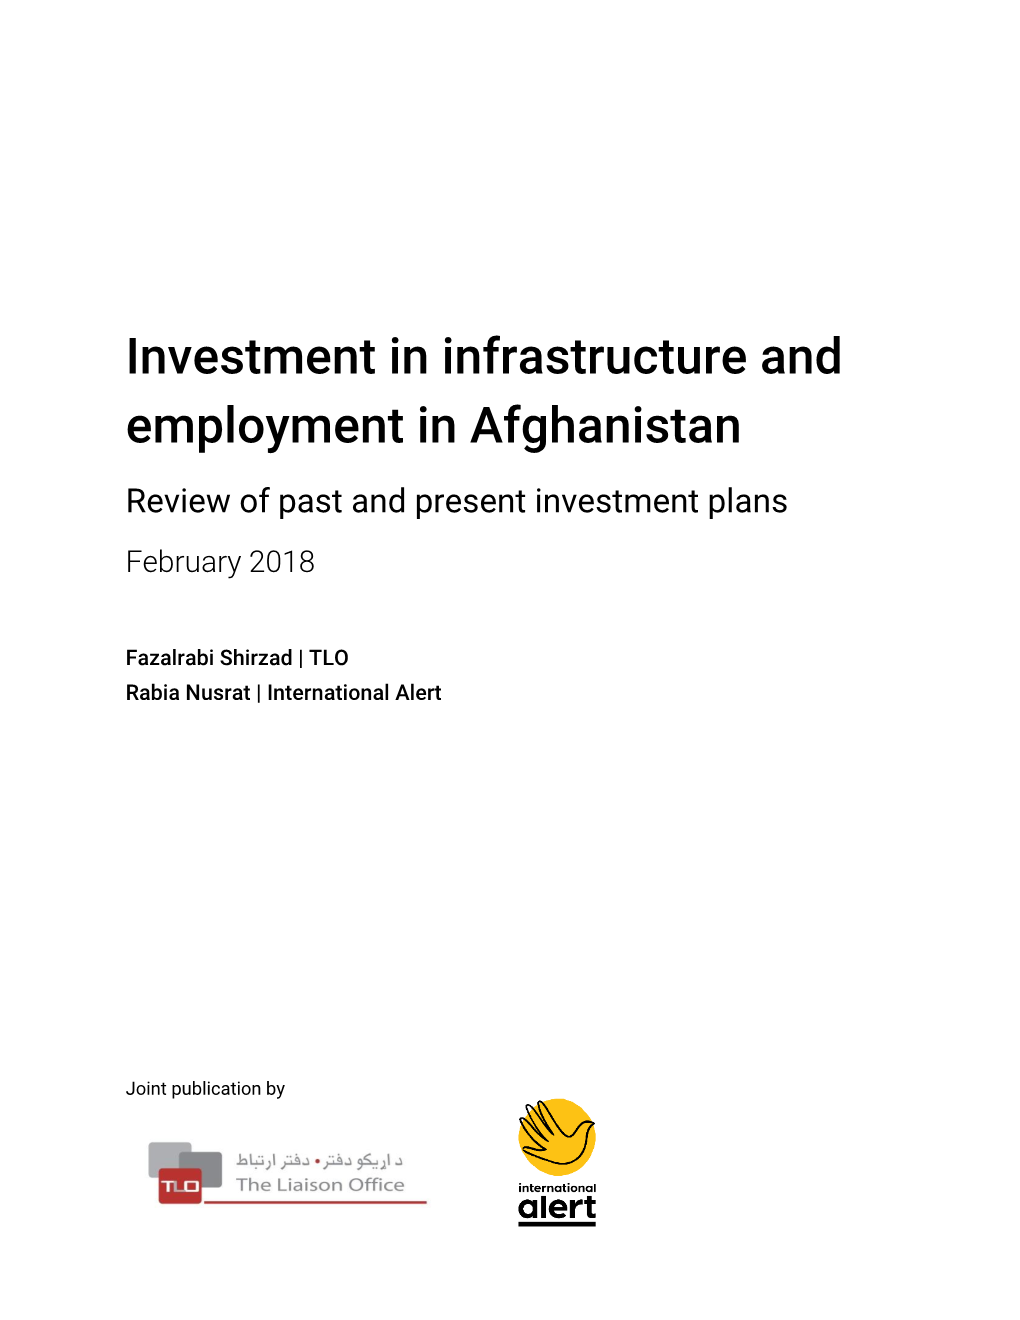 Investment in Infrastructure and Employment in Afghanistan Review of Past and Present Investment Plans February 2018